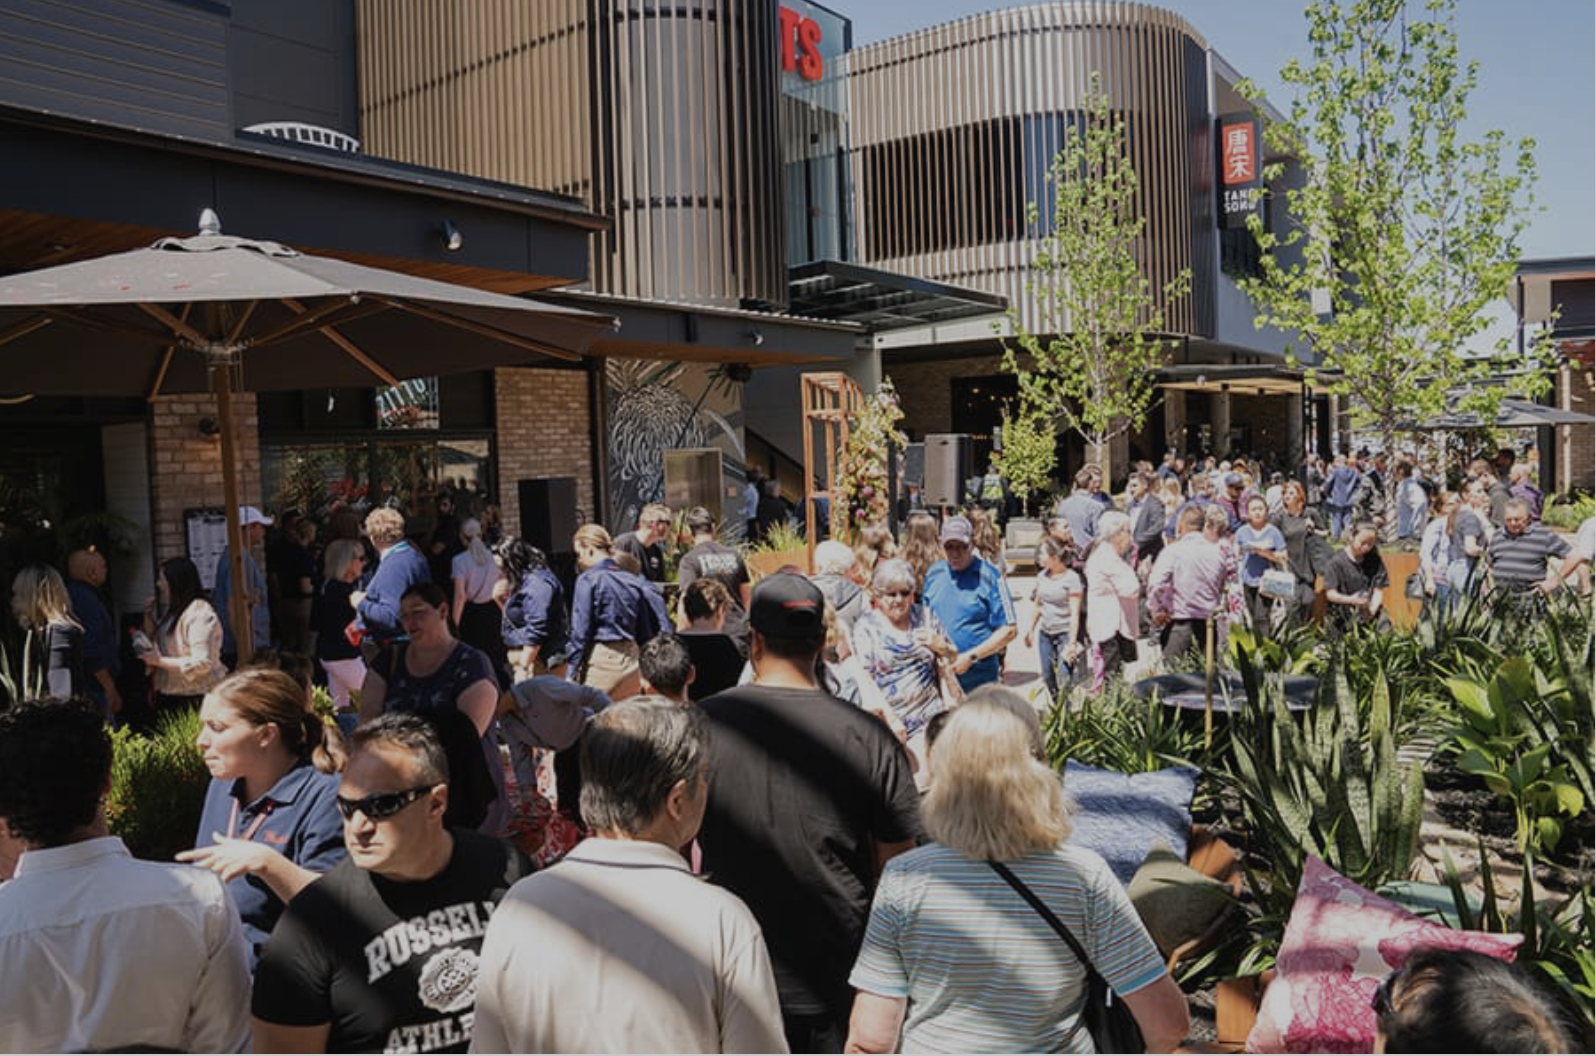 Join a local discussion about the Tea Tree Gully community